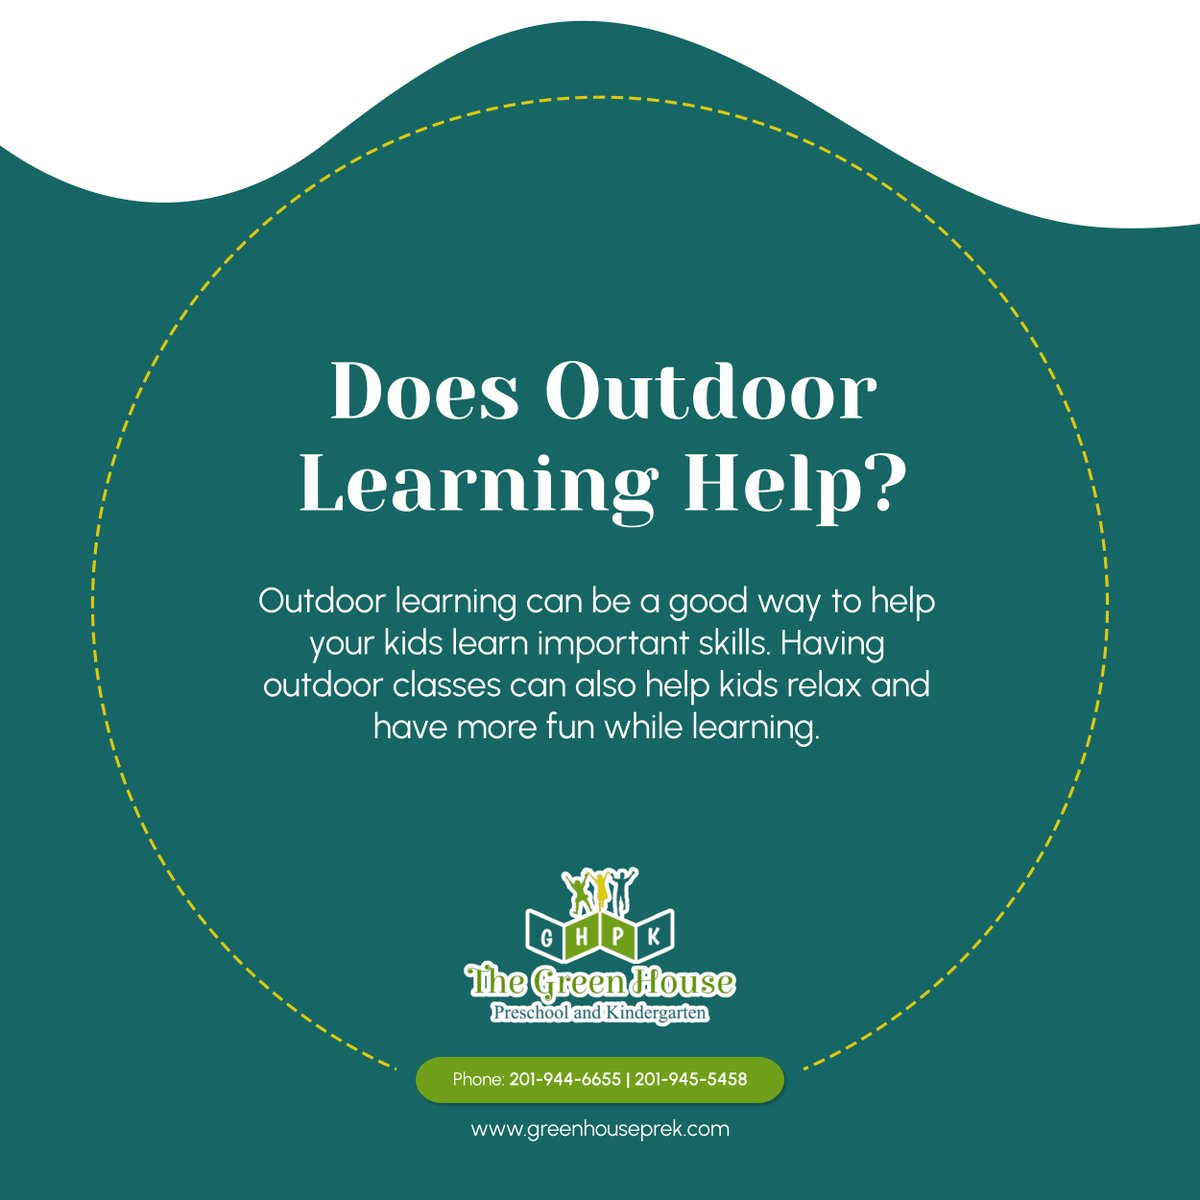 Parents and educators can explore outdoor learning to help their kids learn new skills and abilities. This is also a good way to help your children love nature and playing outside. 

#RidgefieldNJ #Childcare #ChildcareCenter